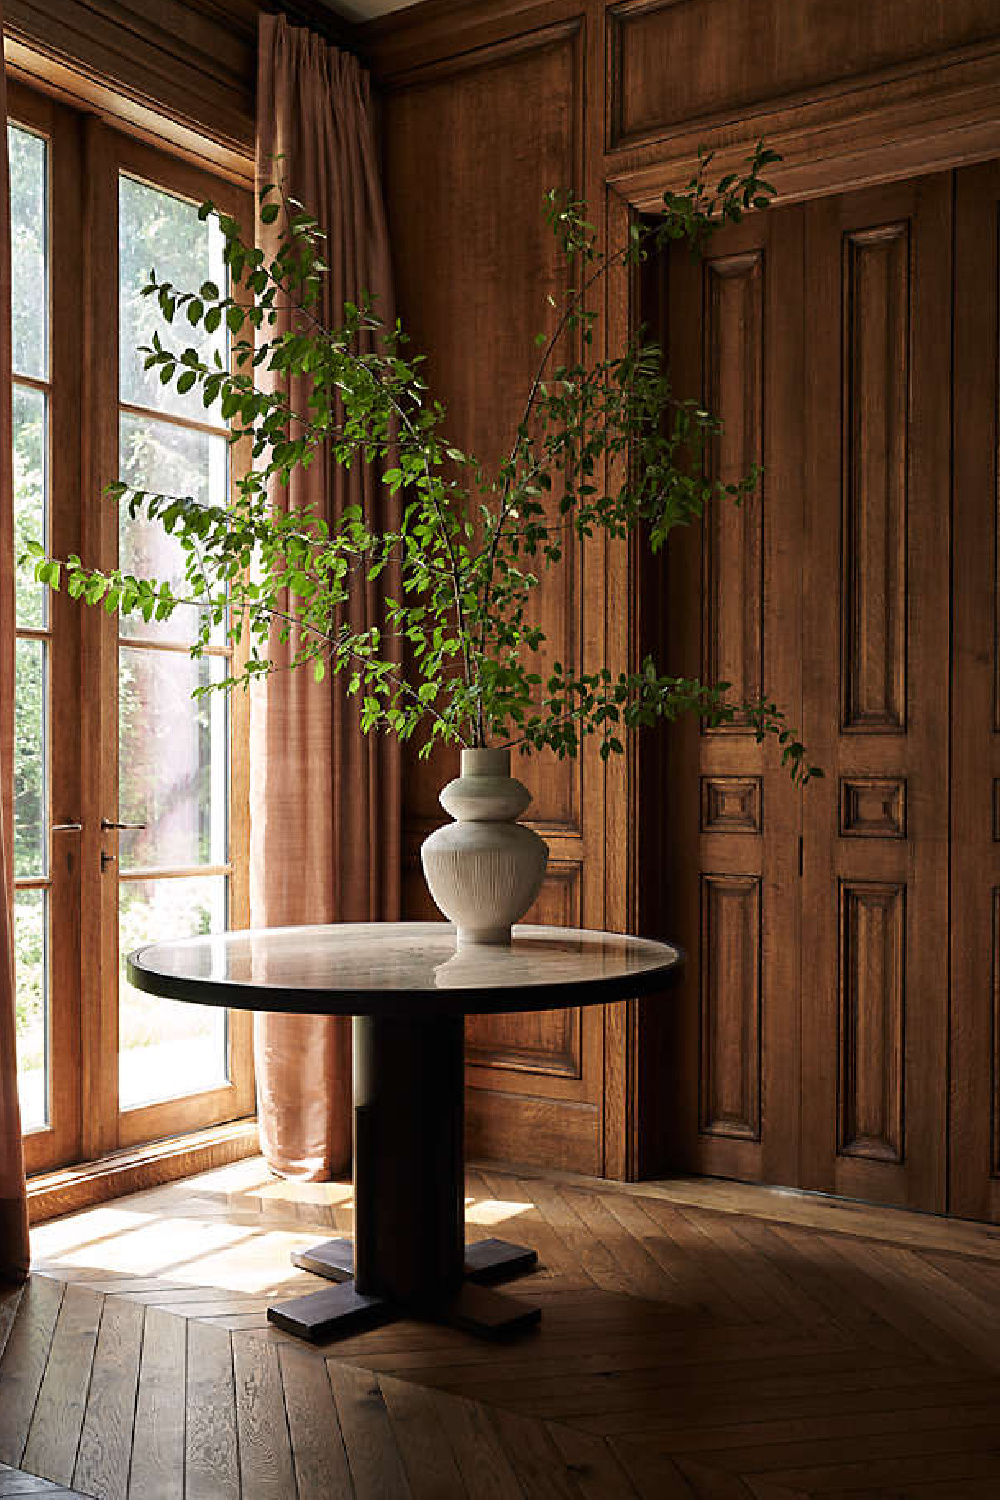 Unica round dining table by Athena Calderone for Crate & Barrel.